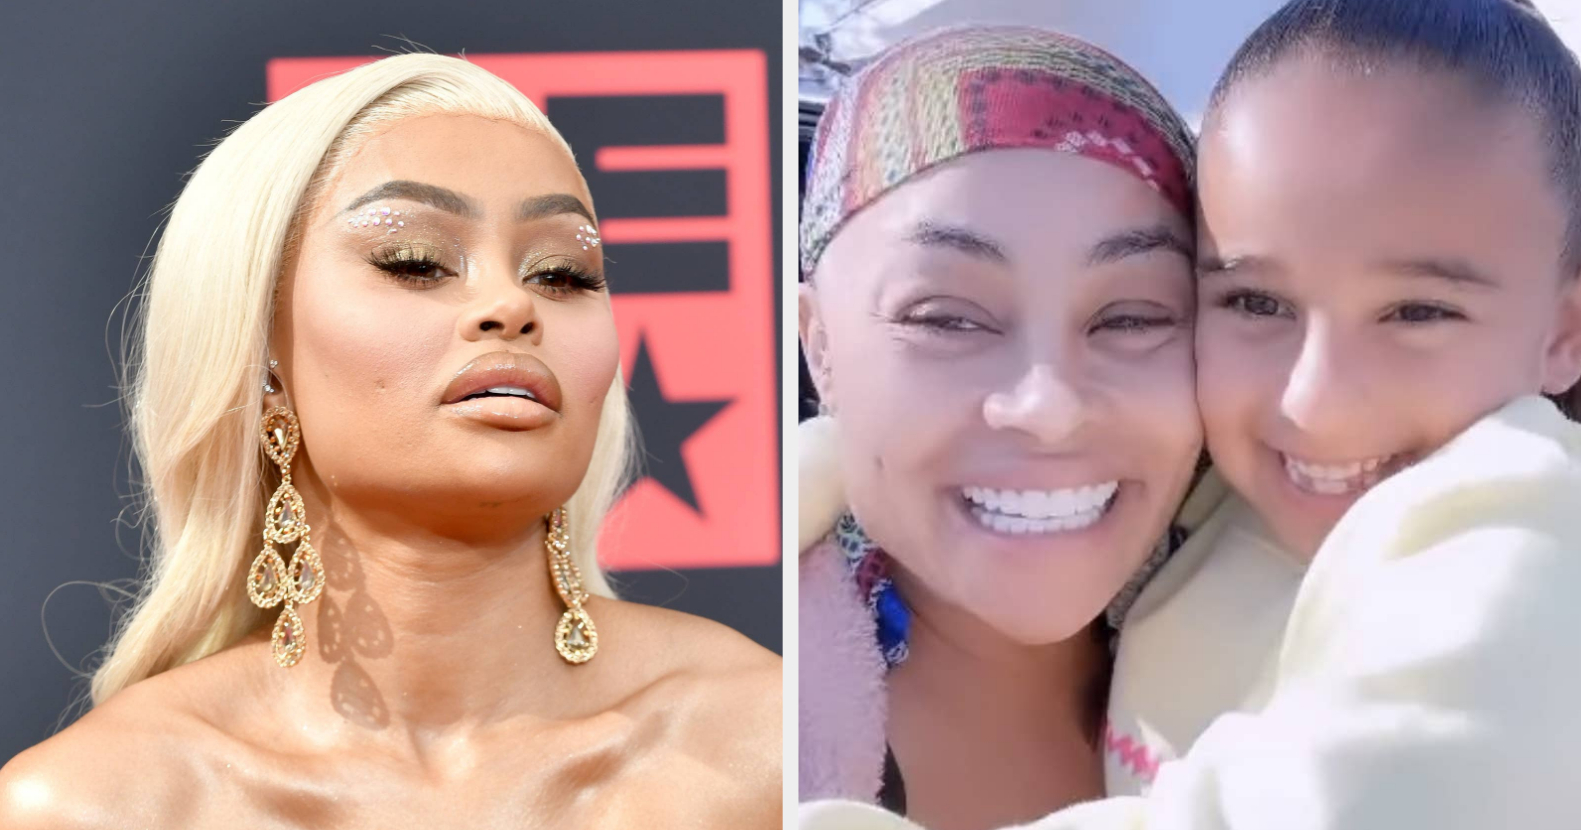 Blac Chyna is seen for the first time since reports that she's